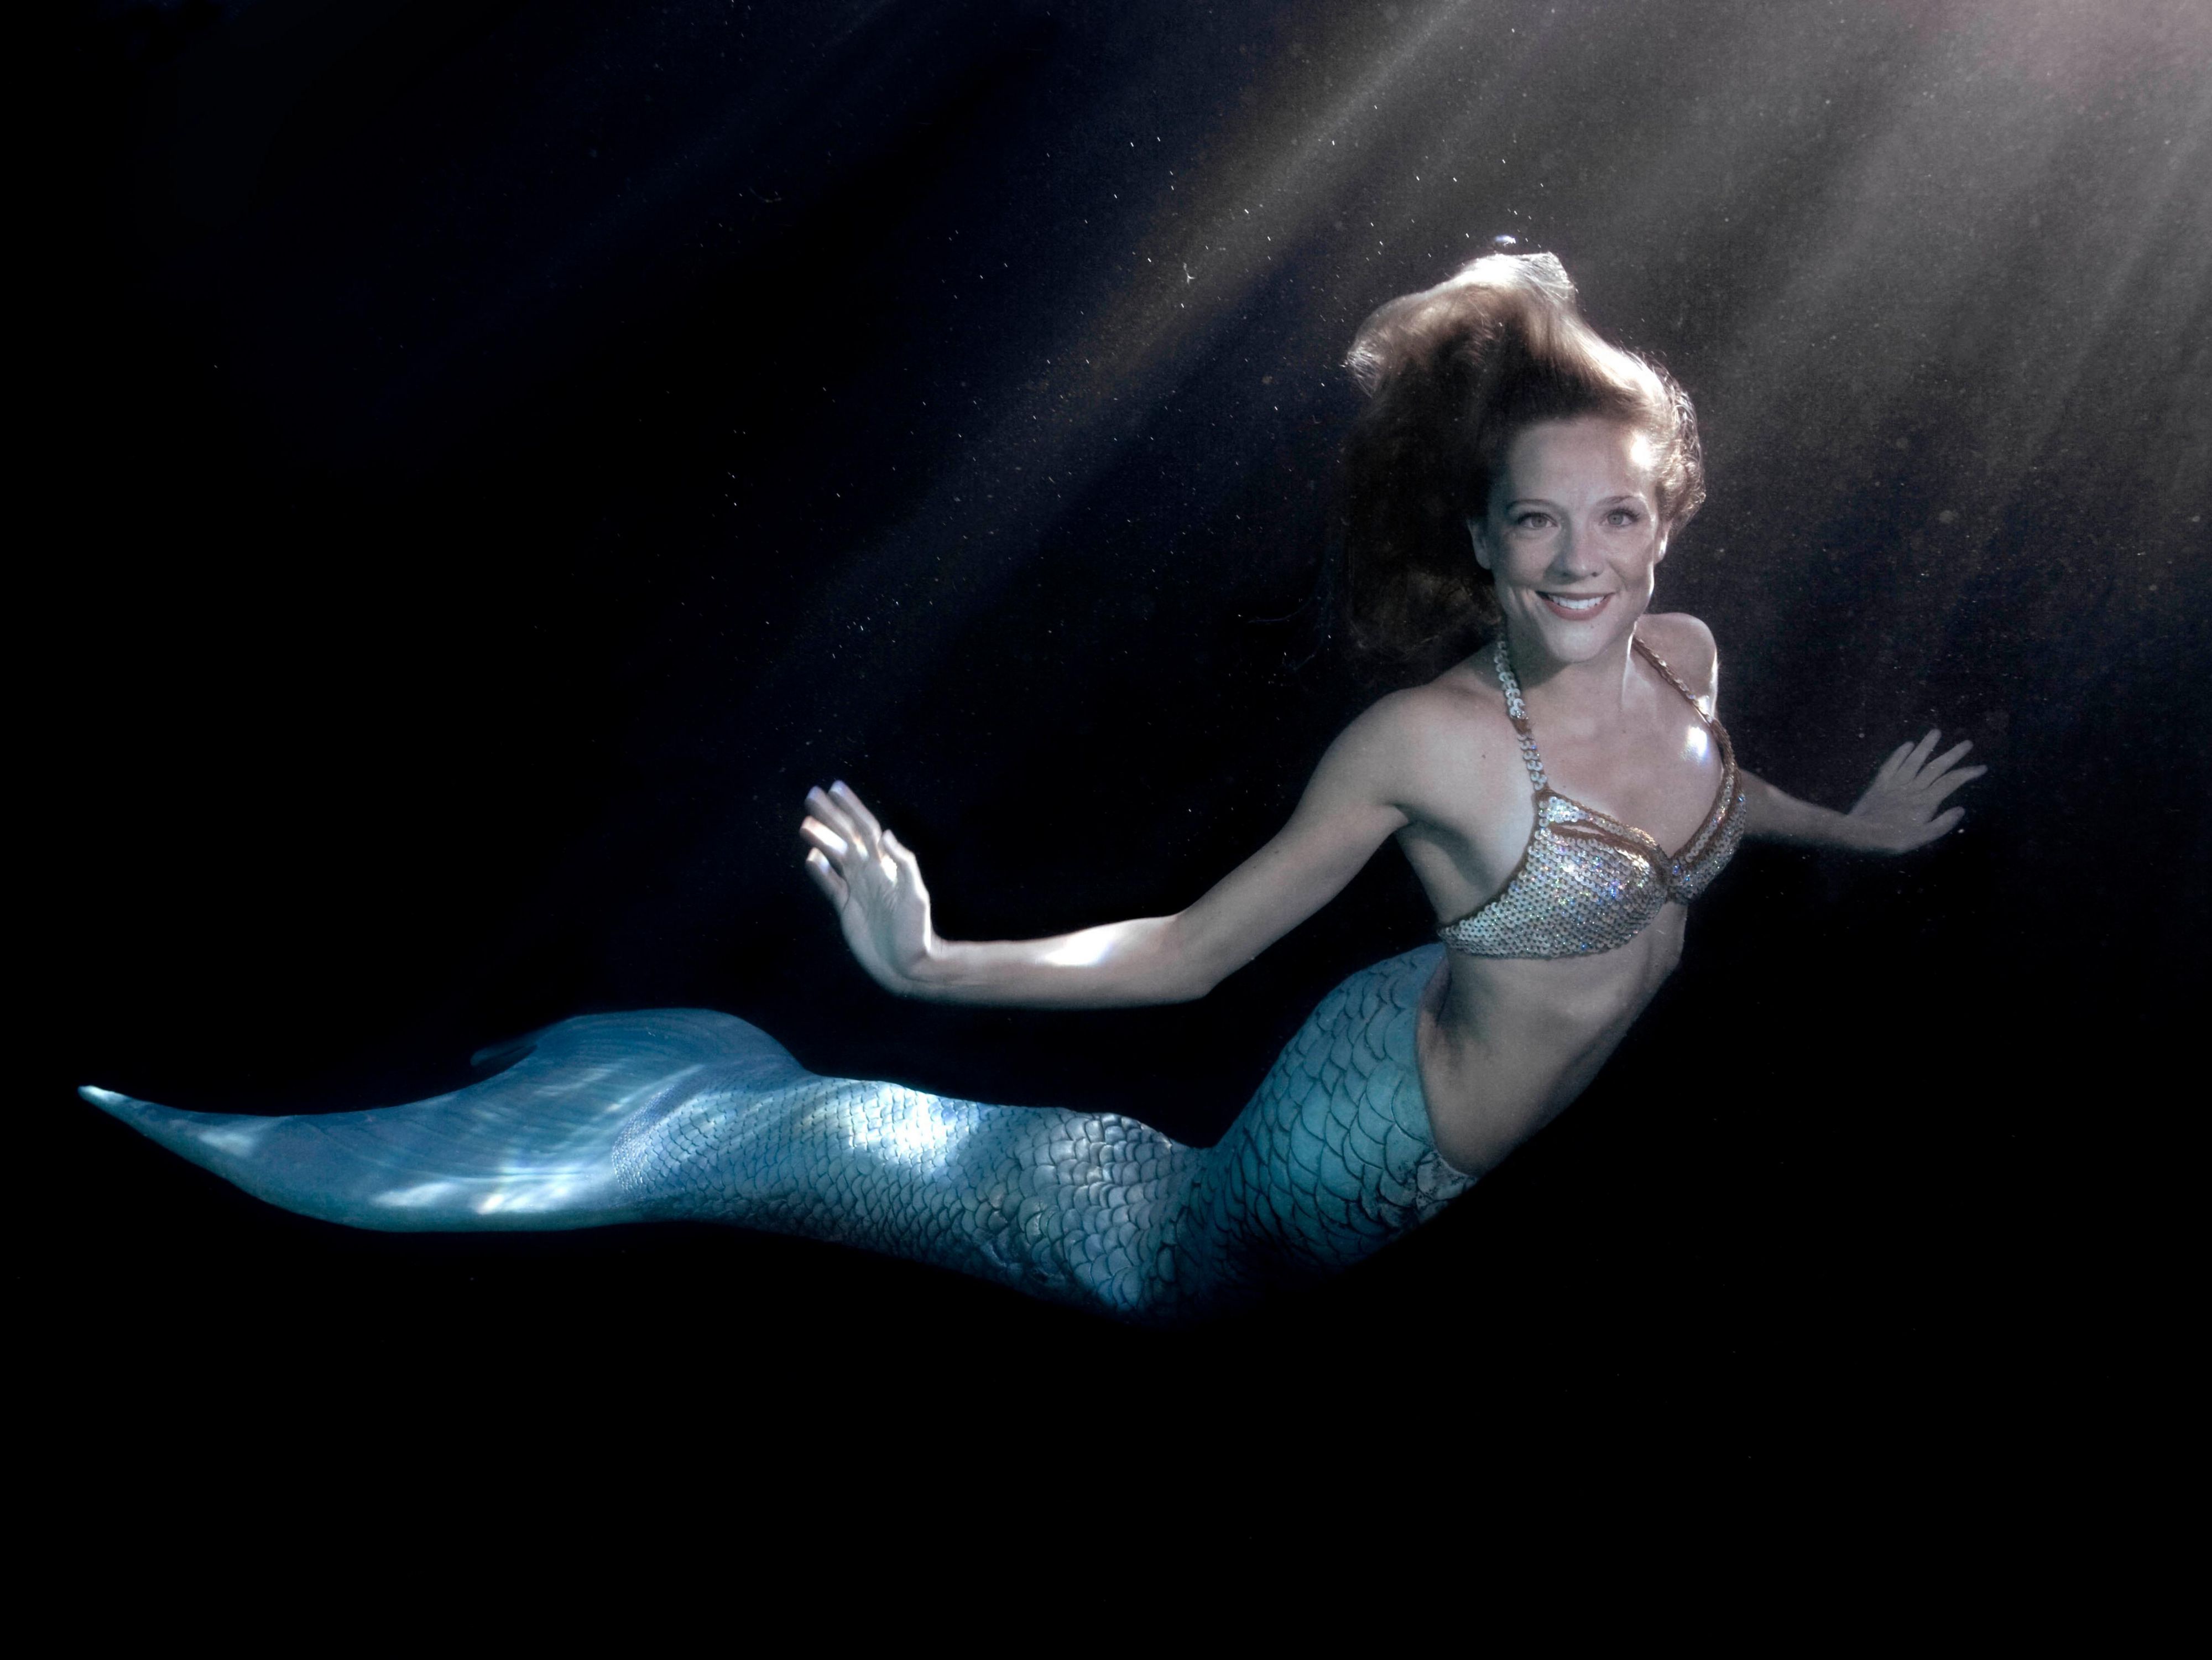 The World Famous Weeki Wachee Mermaids are just 3 miles N of us!